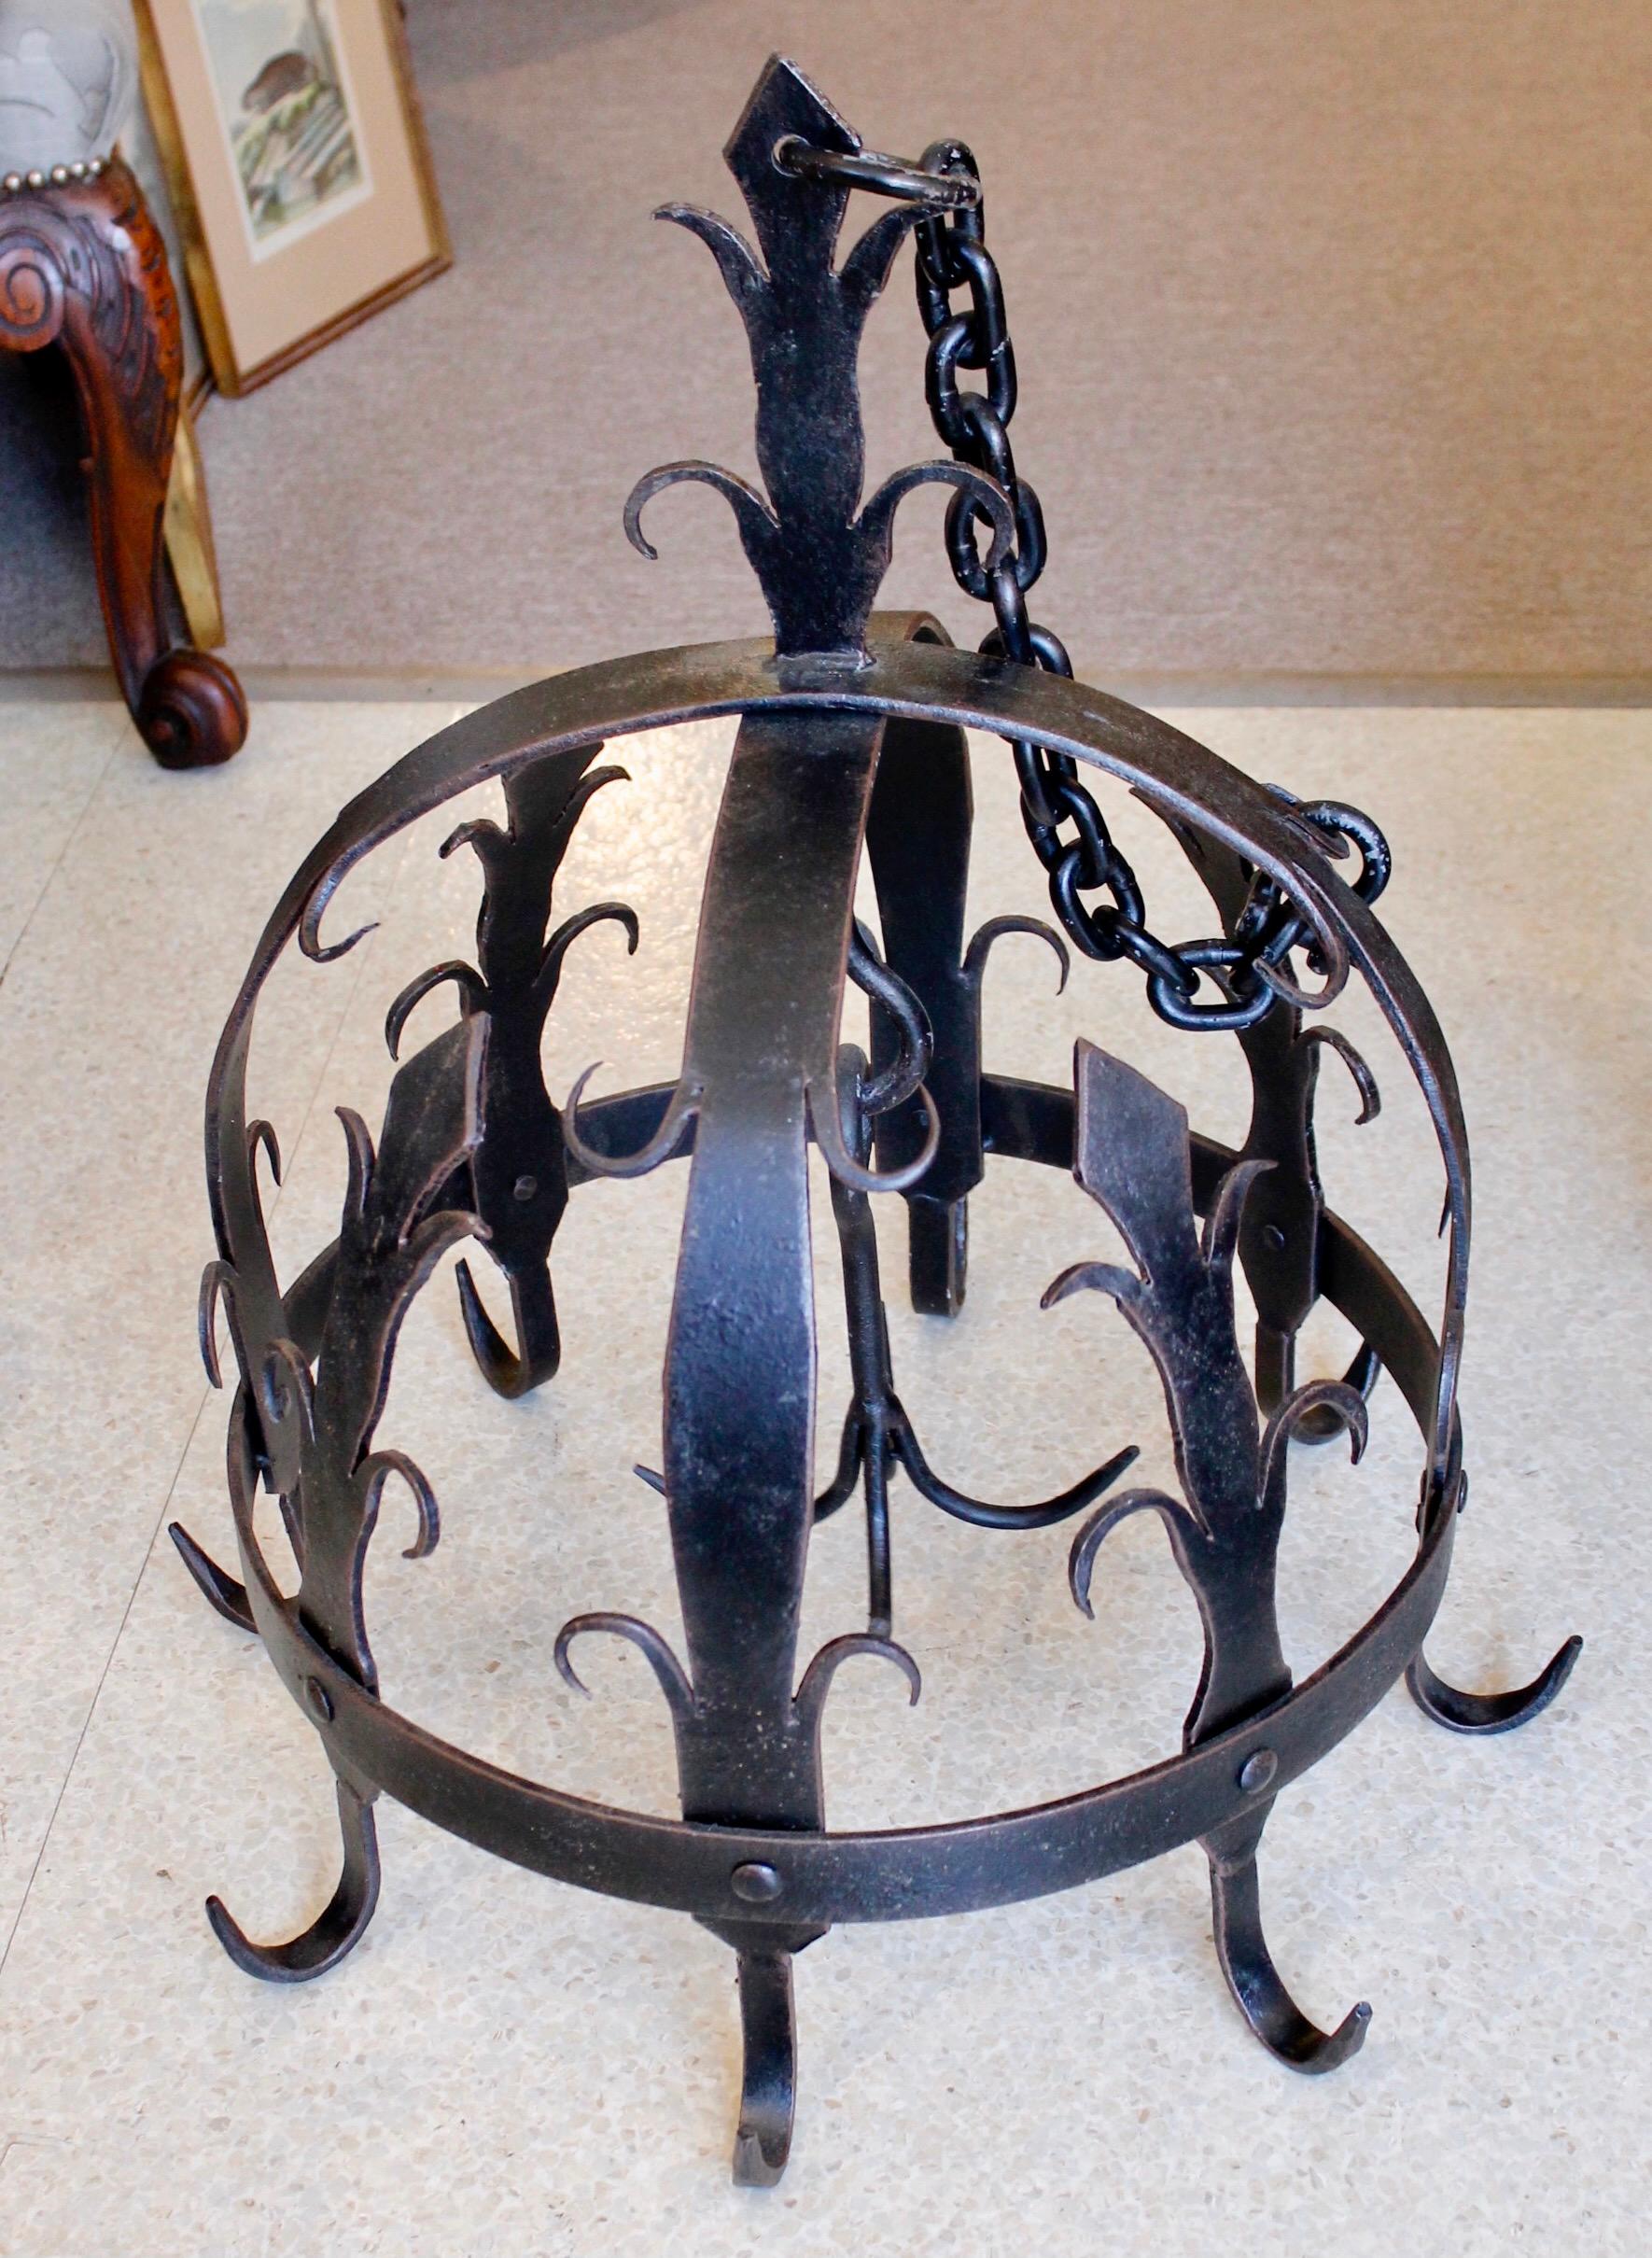 Baroque Ornamental Wrought Iron Pot Rack Or Herb Drying Rack For Sale